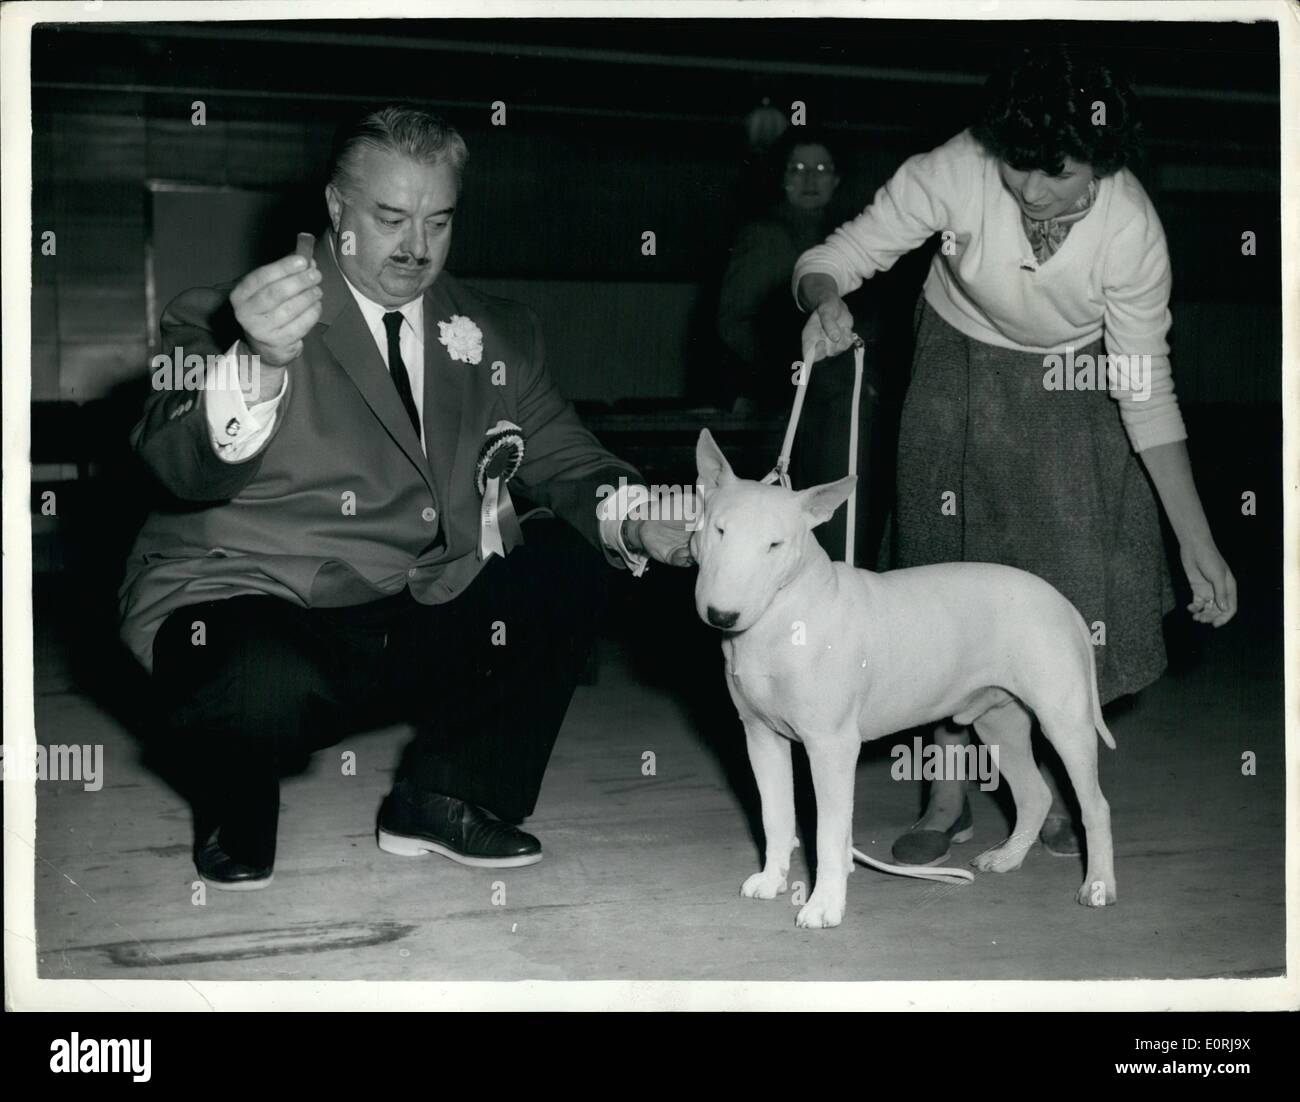 Nov. 11, 1959 - Bull Terrier Club Show In London: Judge From The United States. The annual Championship Show of the Bull Terrier Club is being held today at Seymour Hall London. Photo shows. Dr. H.E. Montgomery's Judge from the United States-judges one of the exhibits-at the show this morning. Stock Photo